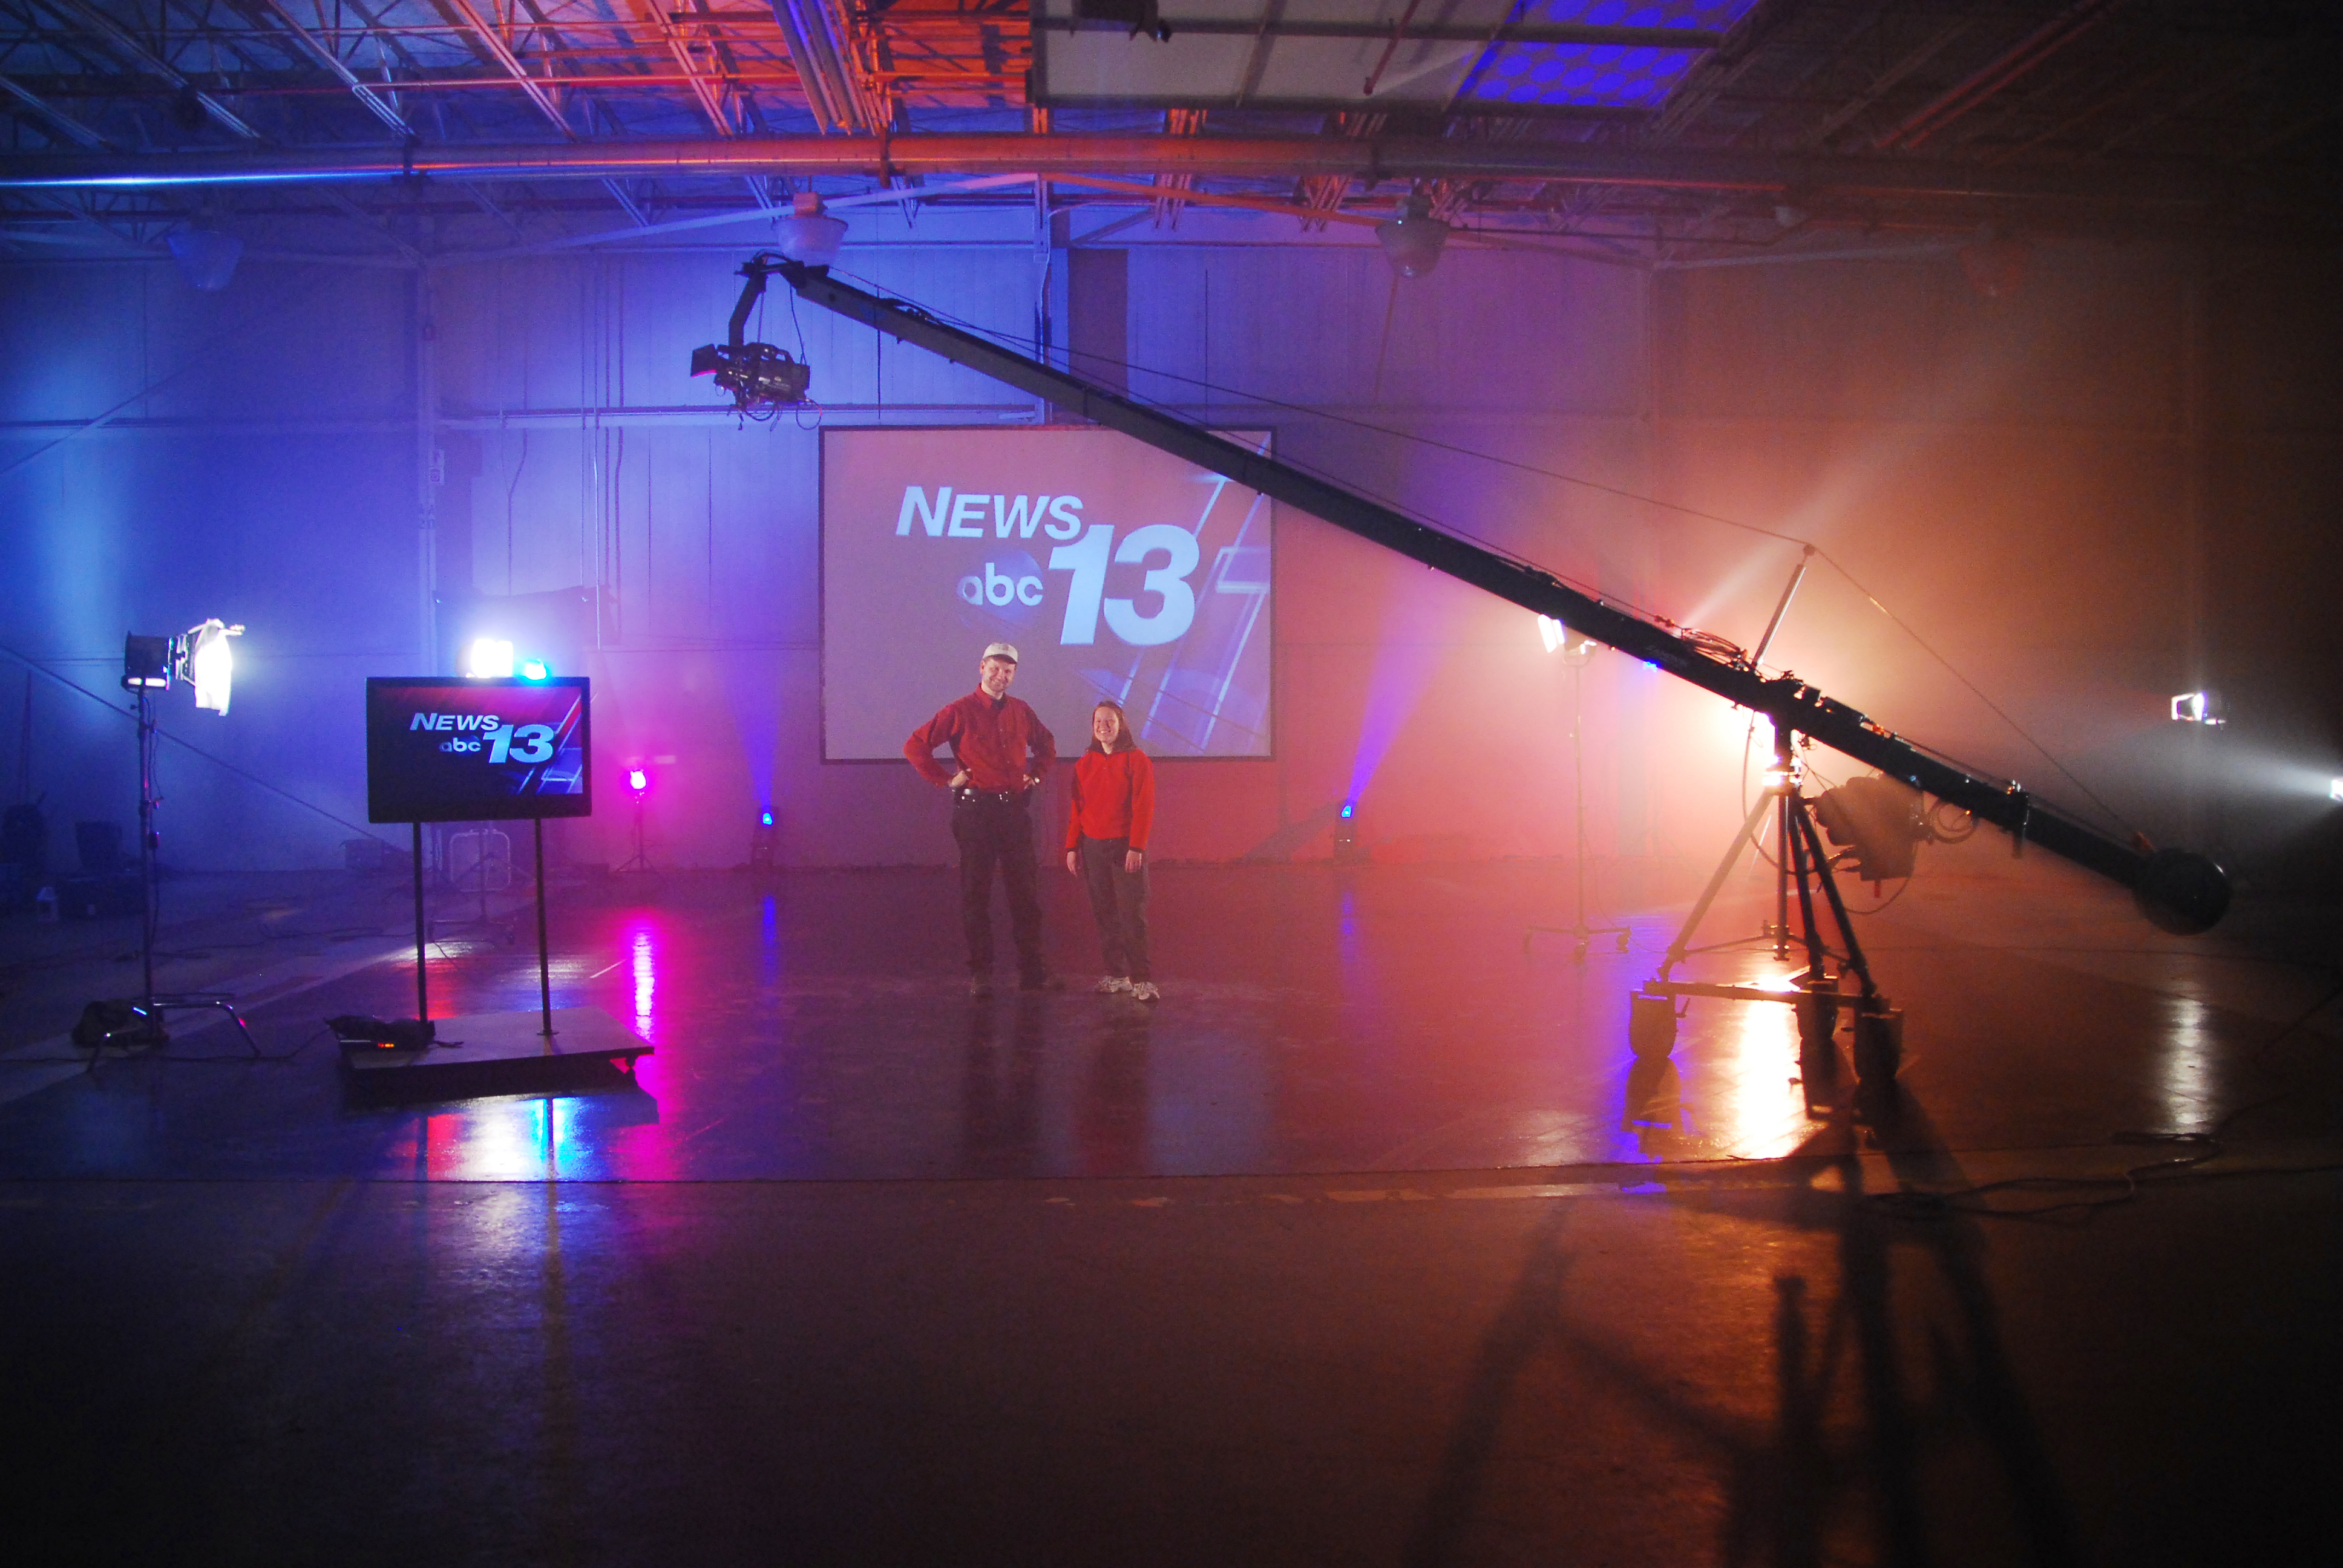 Director and Jib Operator for the WLOS promos in 2008.